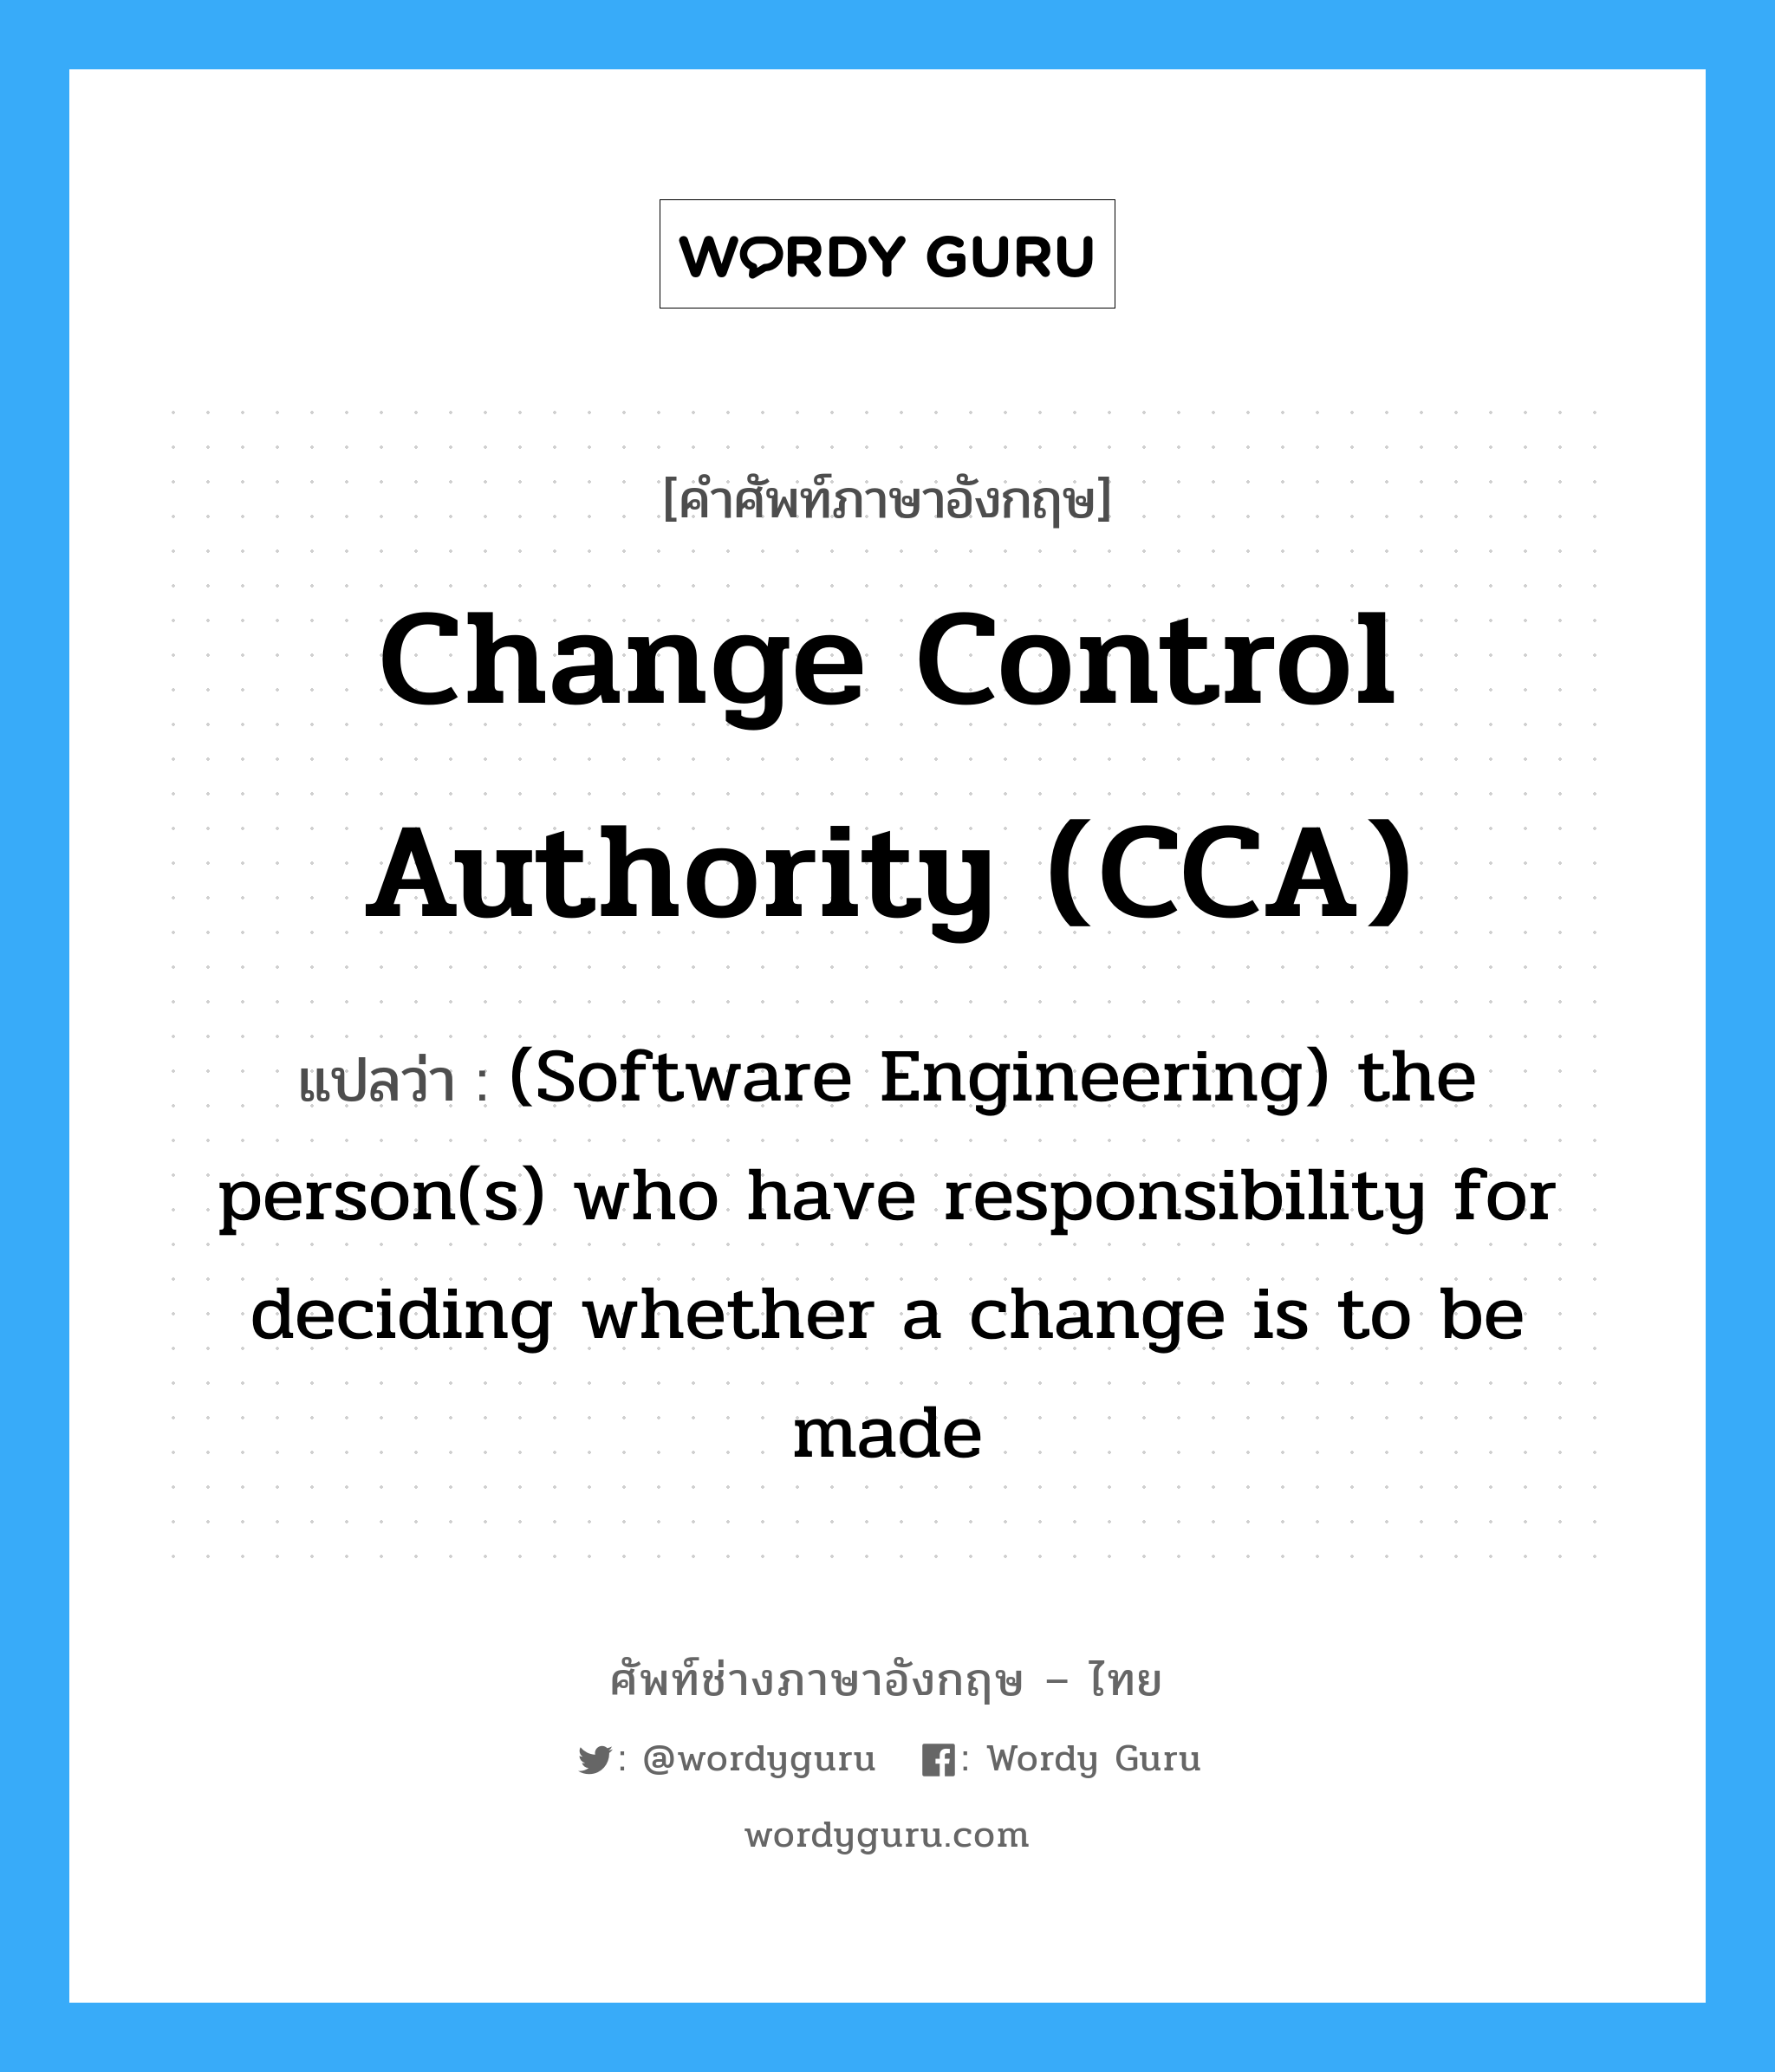 Change control authority (CCA) แปลว่า?, คำศัพท์ช่างภาษาอังกฤษ - ไทย Change control authority (CCA) คำศัพท์ภาษาอังกฤษ Change control authority (CCA) แปลว่า (Software Engineering) the person(s) who have responsibility for deciding whether a change is to be made